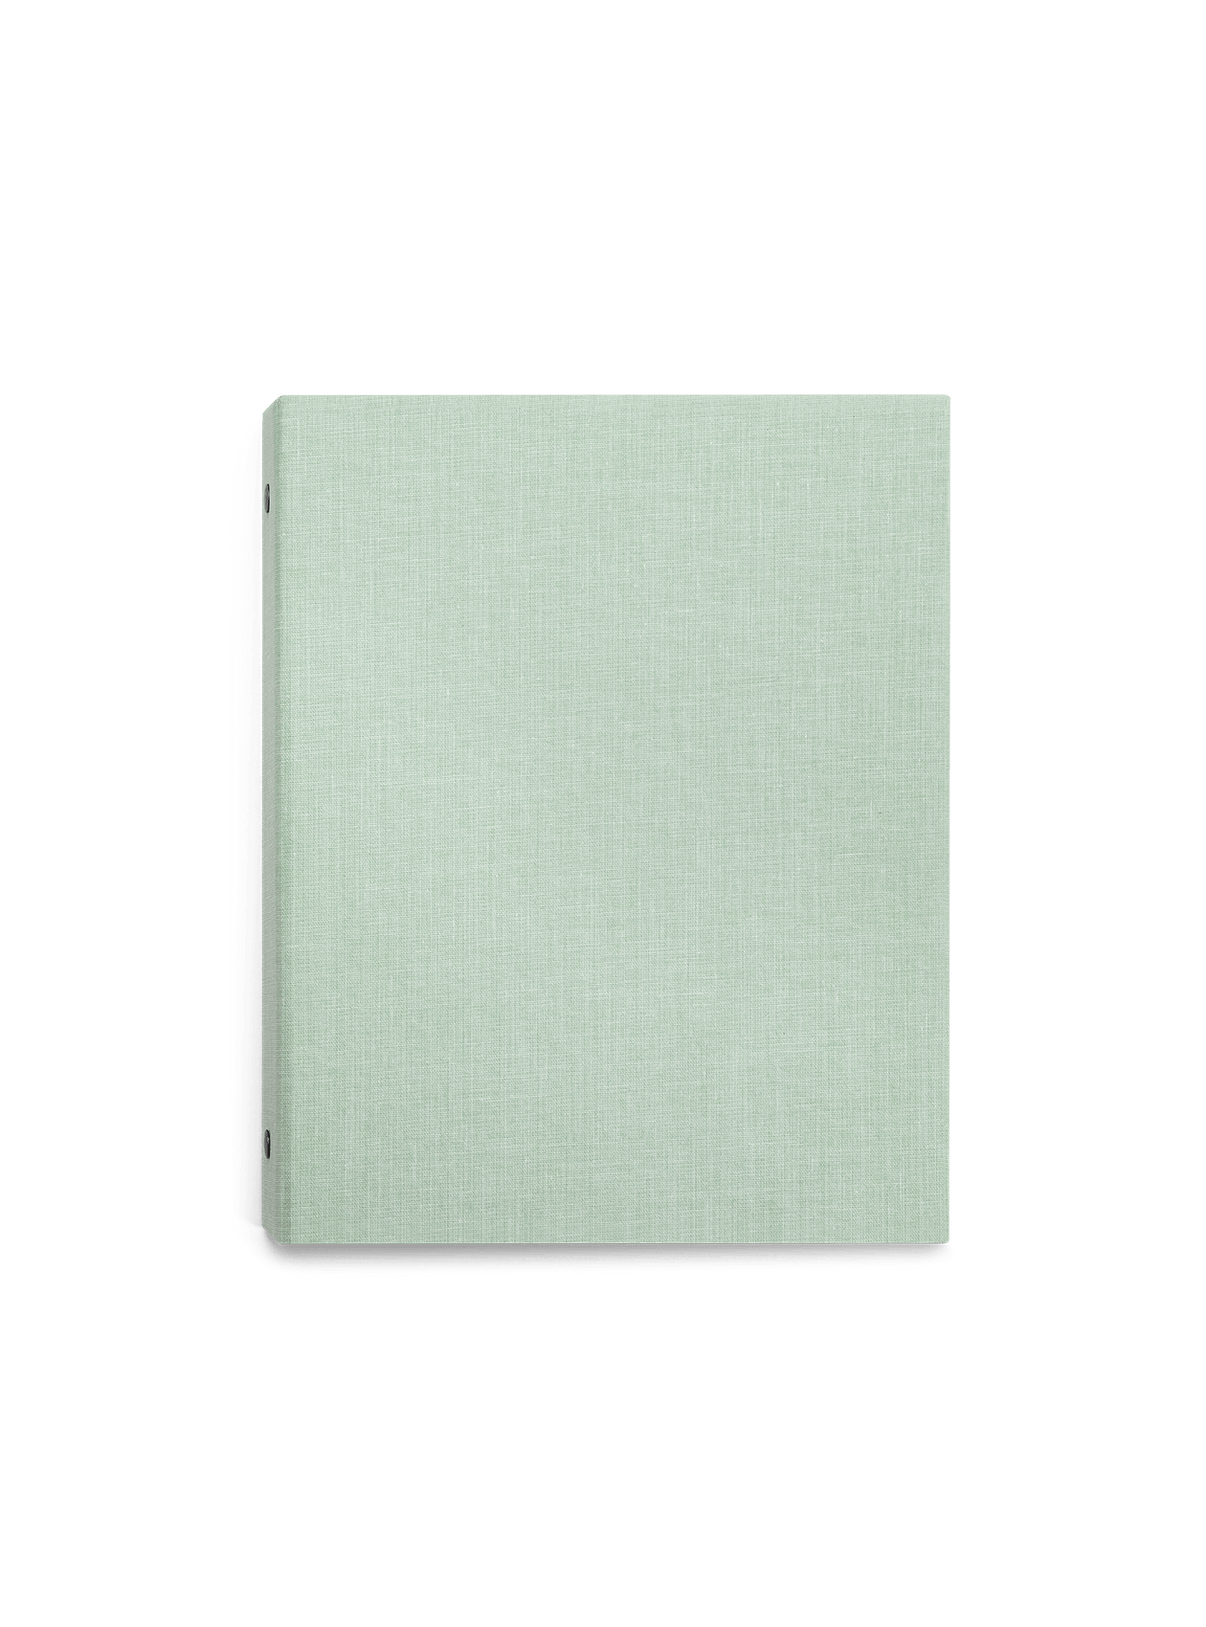 The Appointed 24-25 Daily Planner in Mineral Green with casebound hardcover and gold foil details || Mineral Green